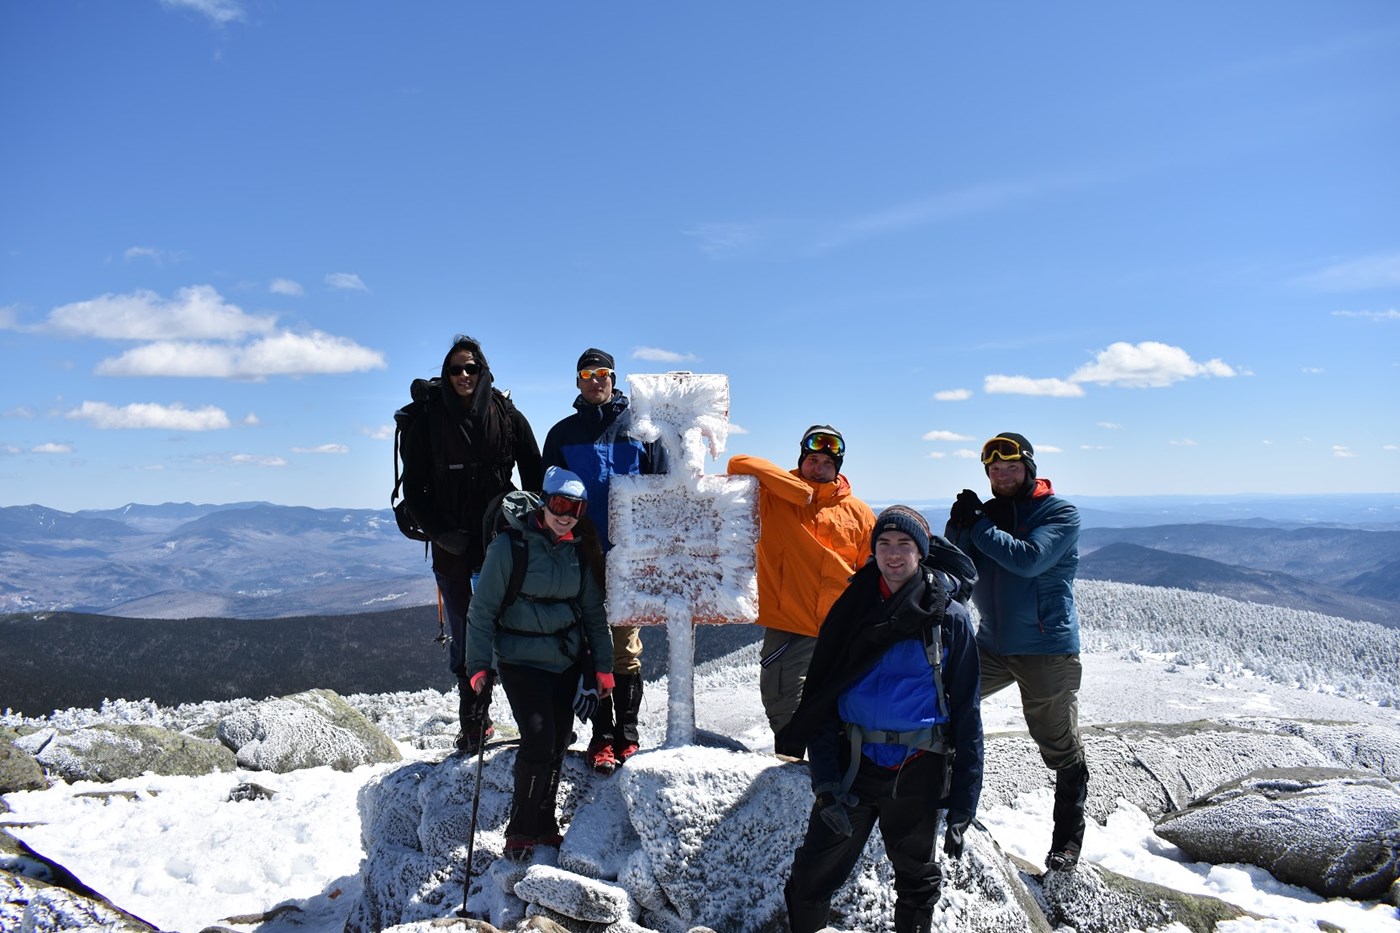 Group of hikers standing atop Mount Moosilauke’s summit near an iced over marker sign with a snow covered mountain side in the background.